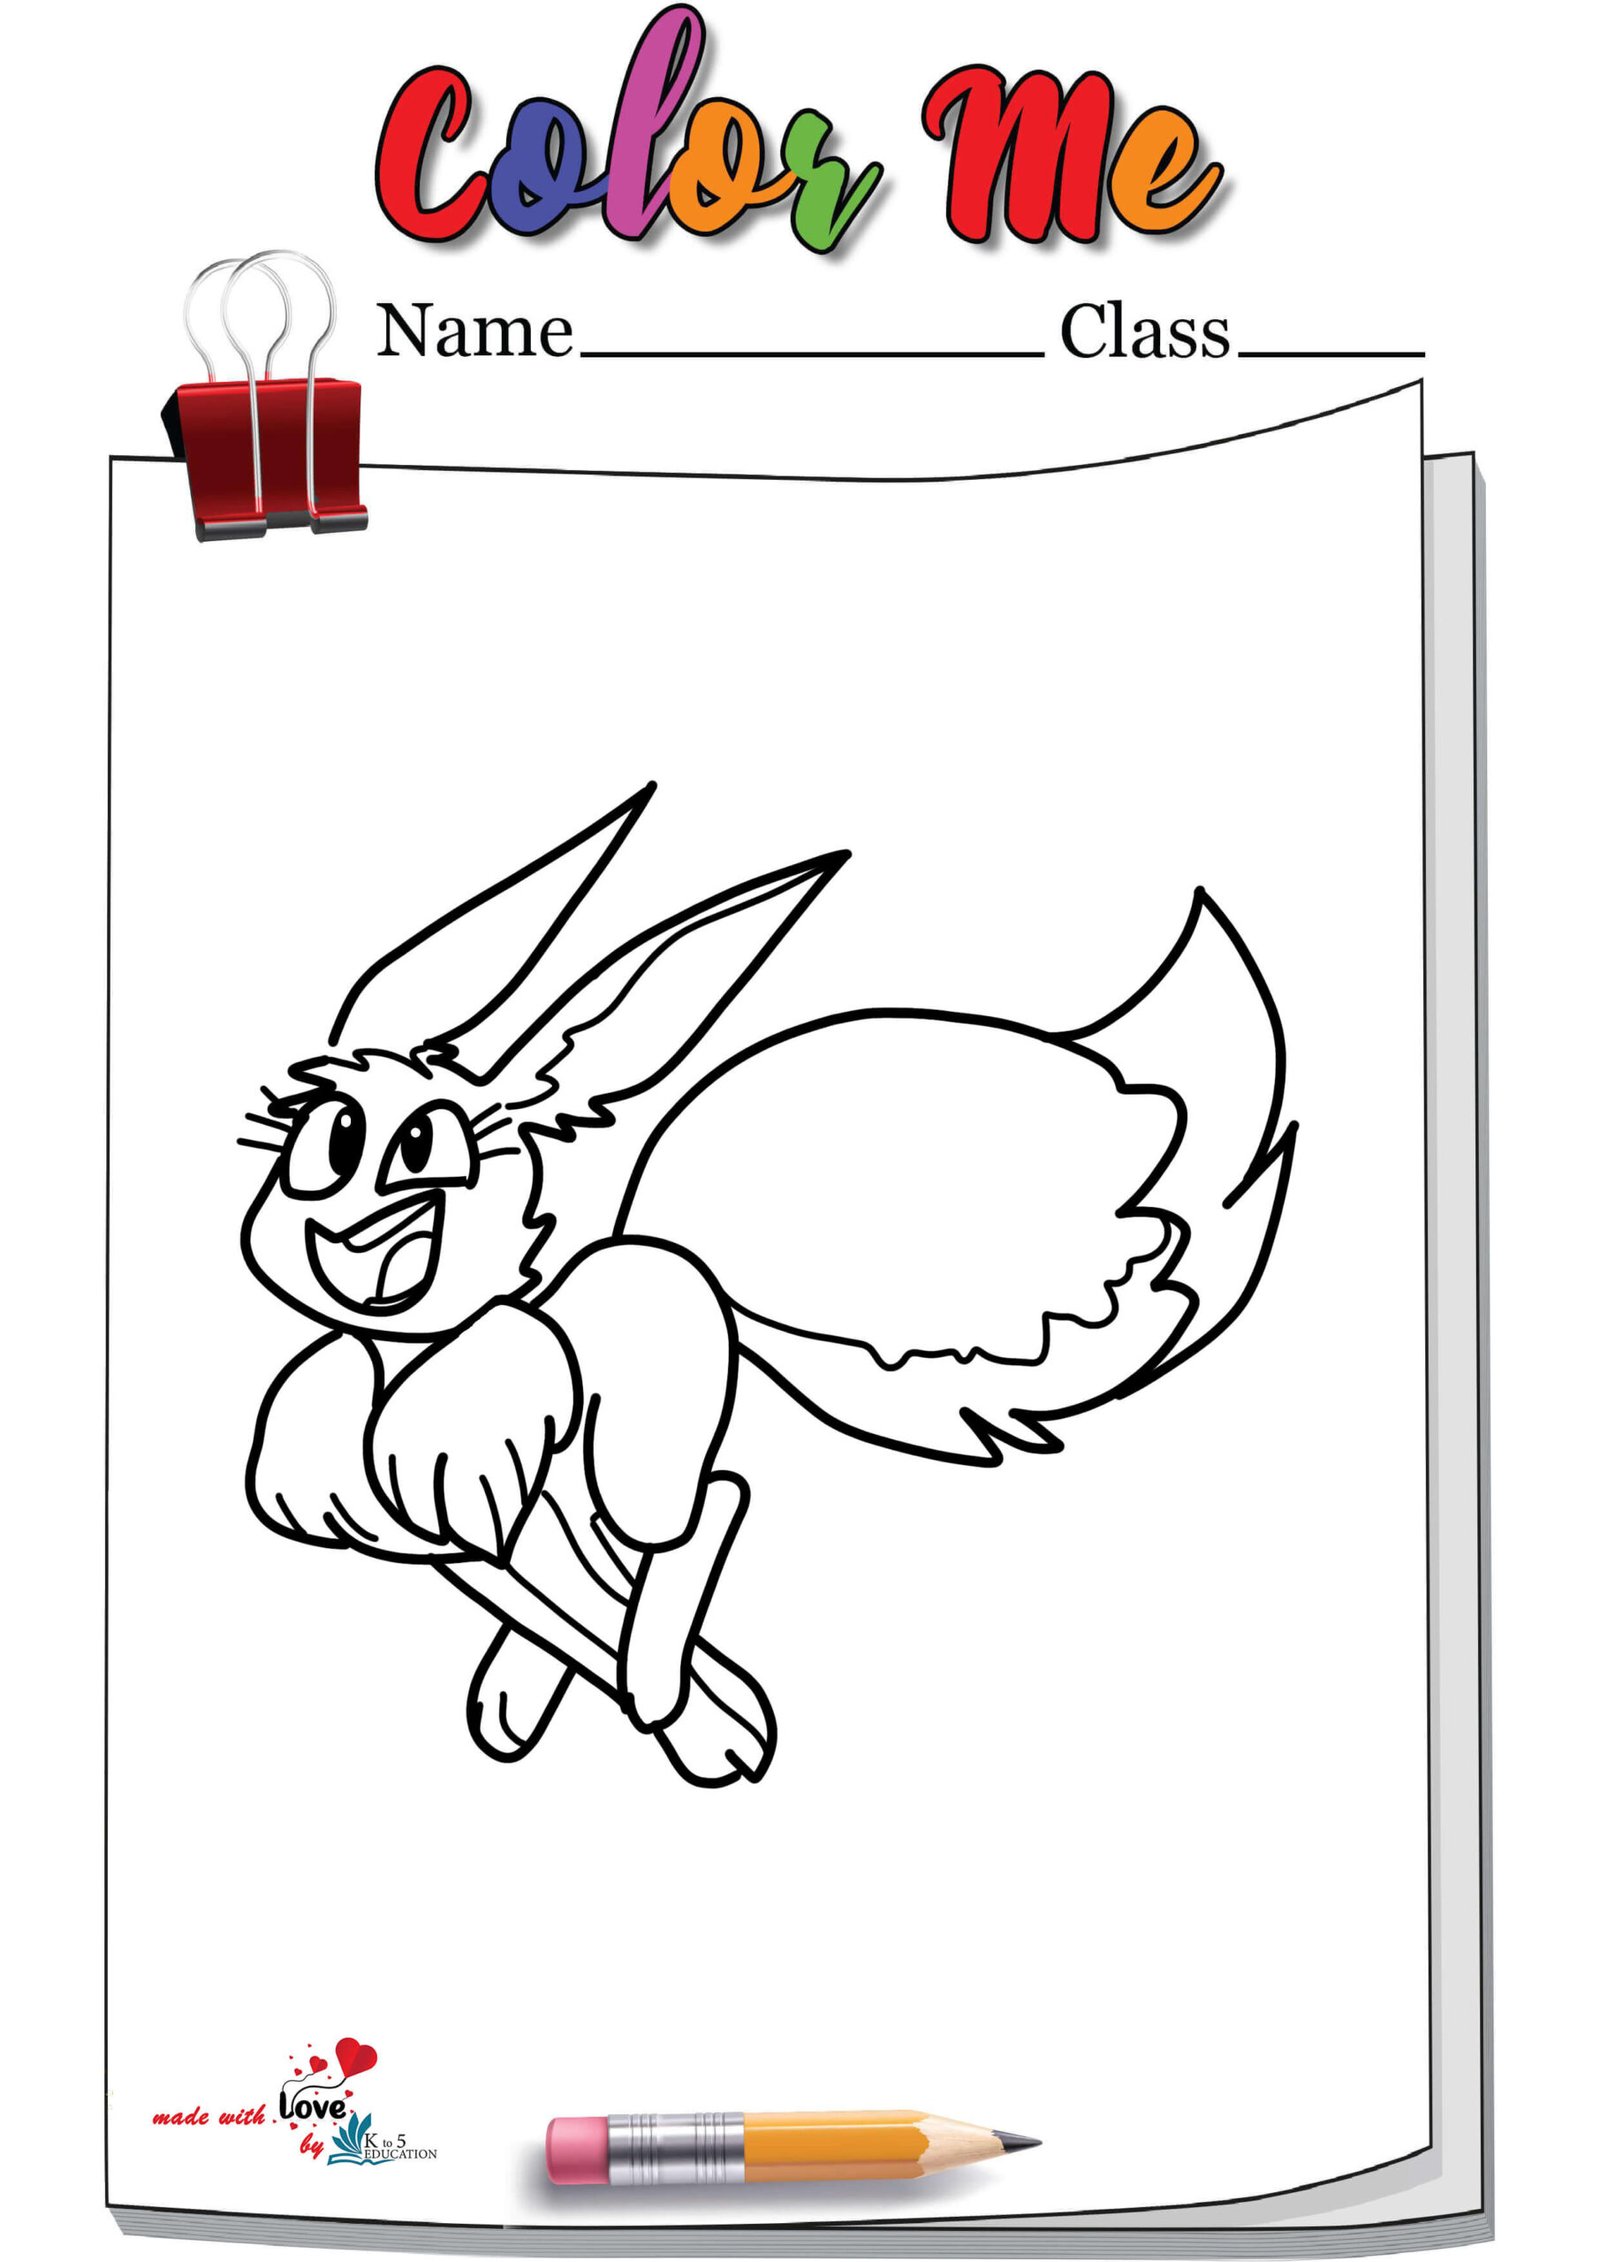 Cute Vaporeon Coloring Page